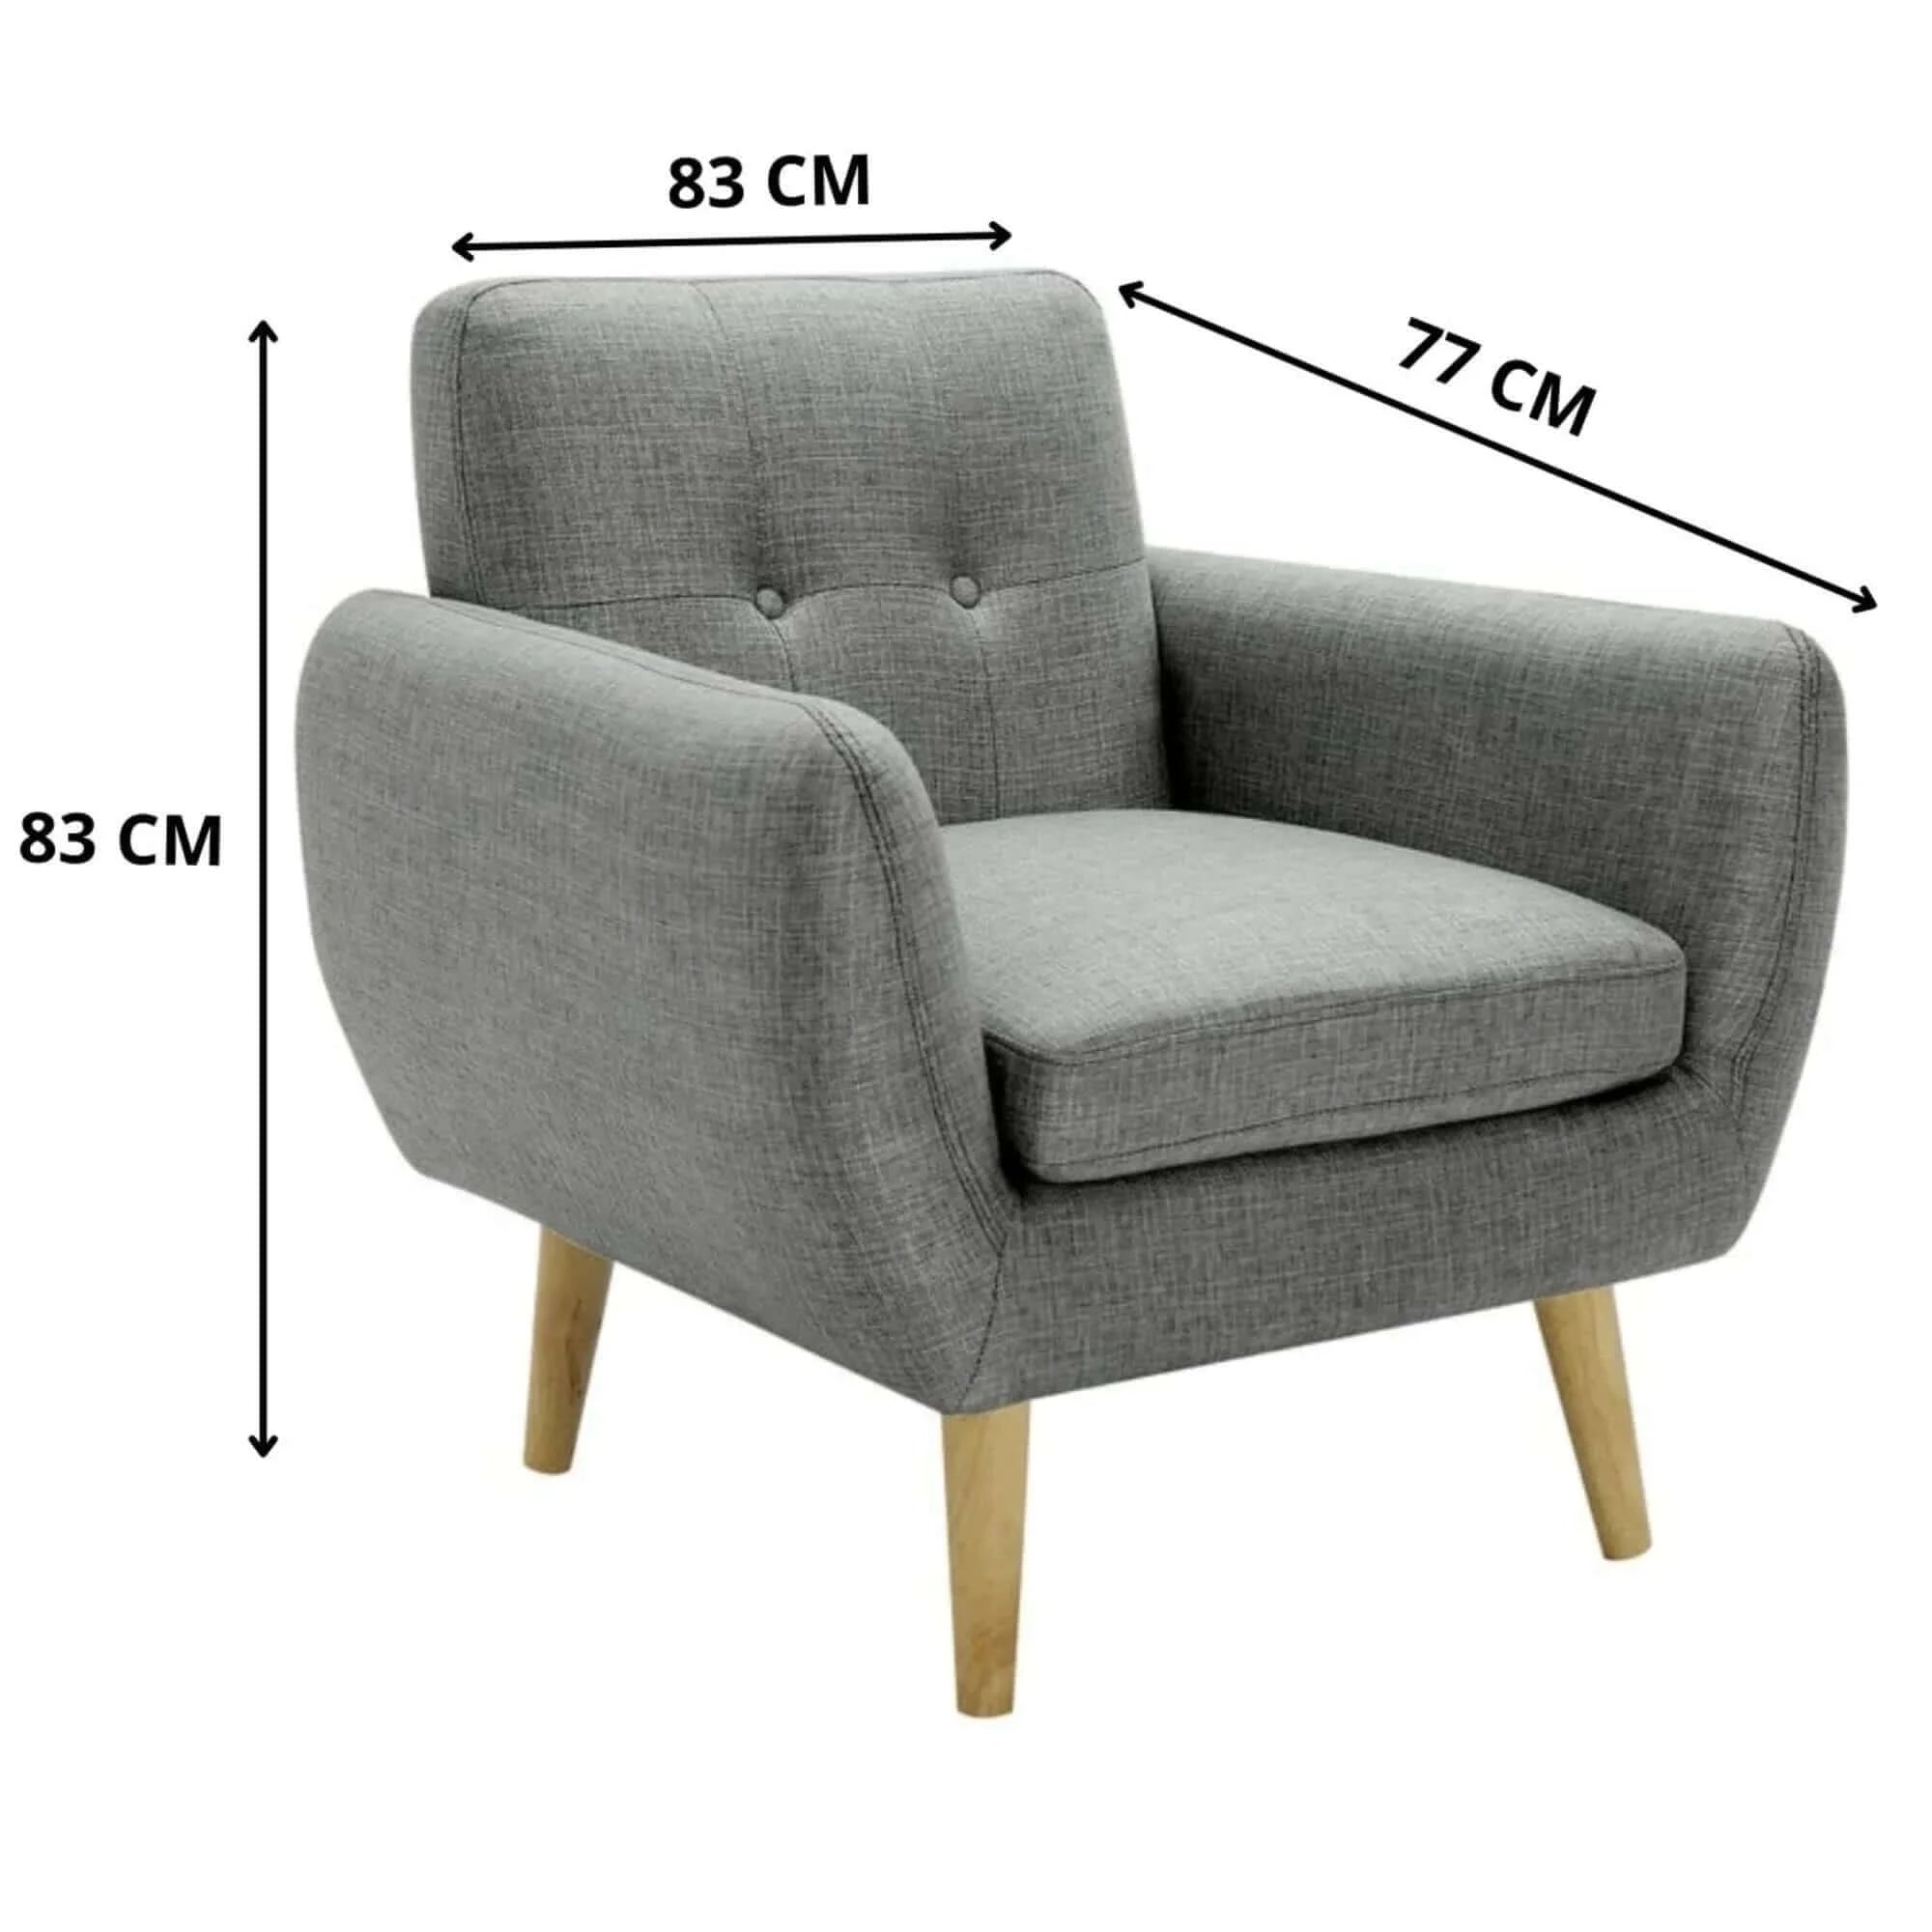 Buy dane 3 + 1 seater fabric upholstered sofa armchair lounge couch - mid grey - upinteriors-Upinteriors